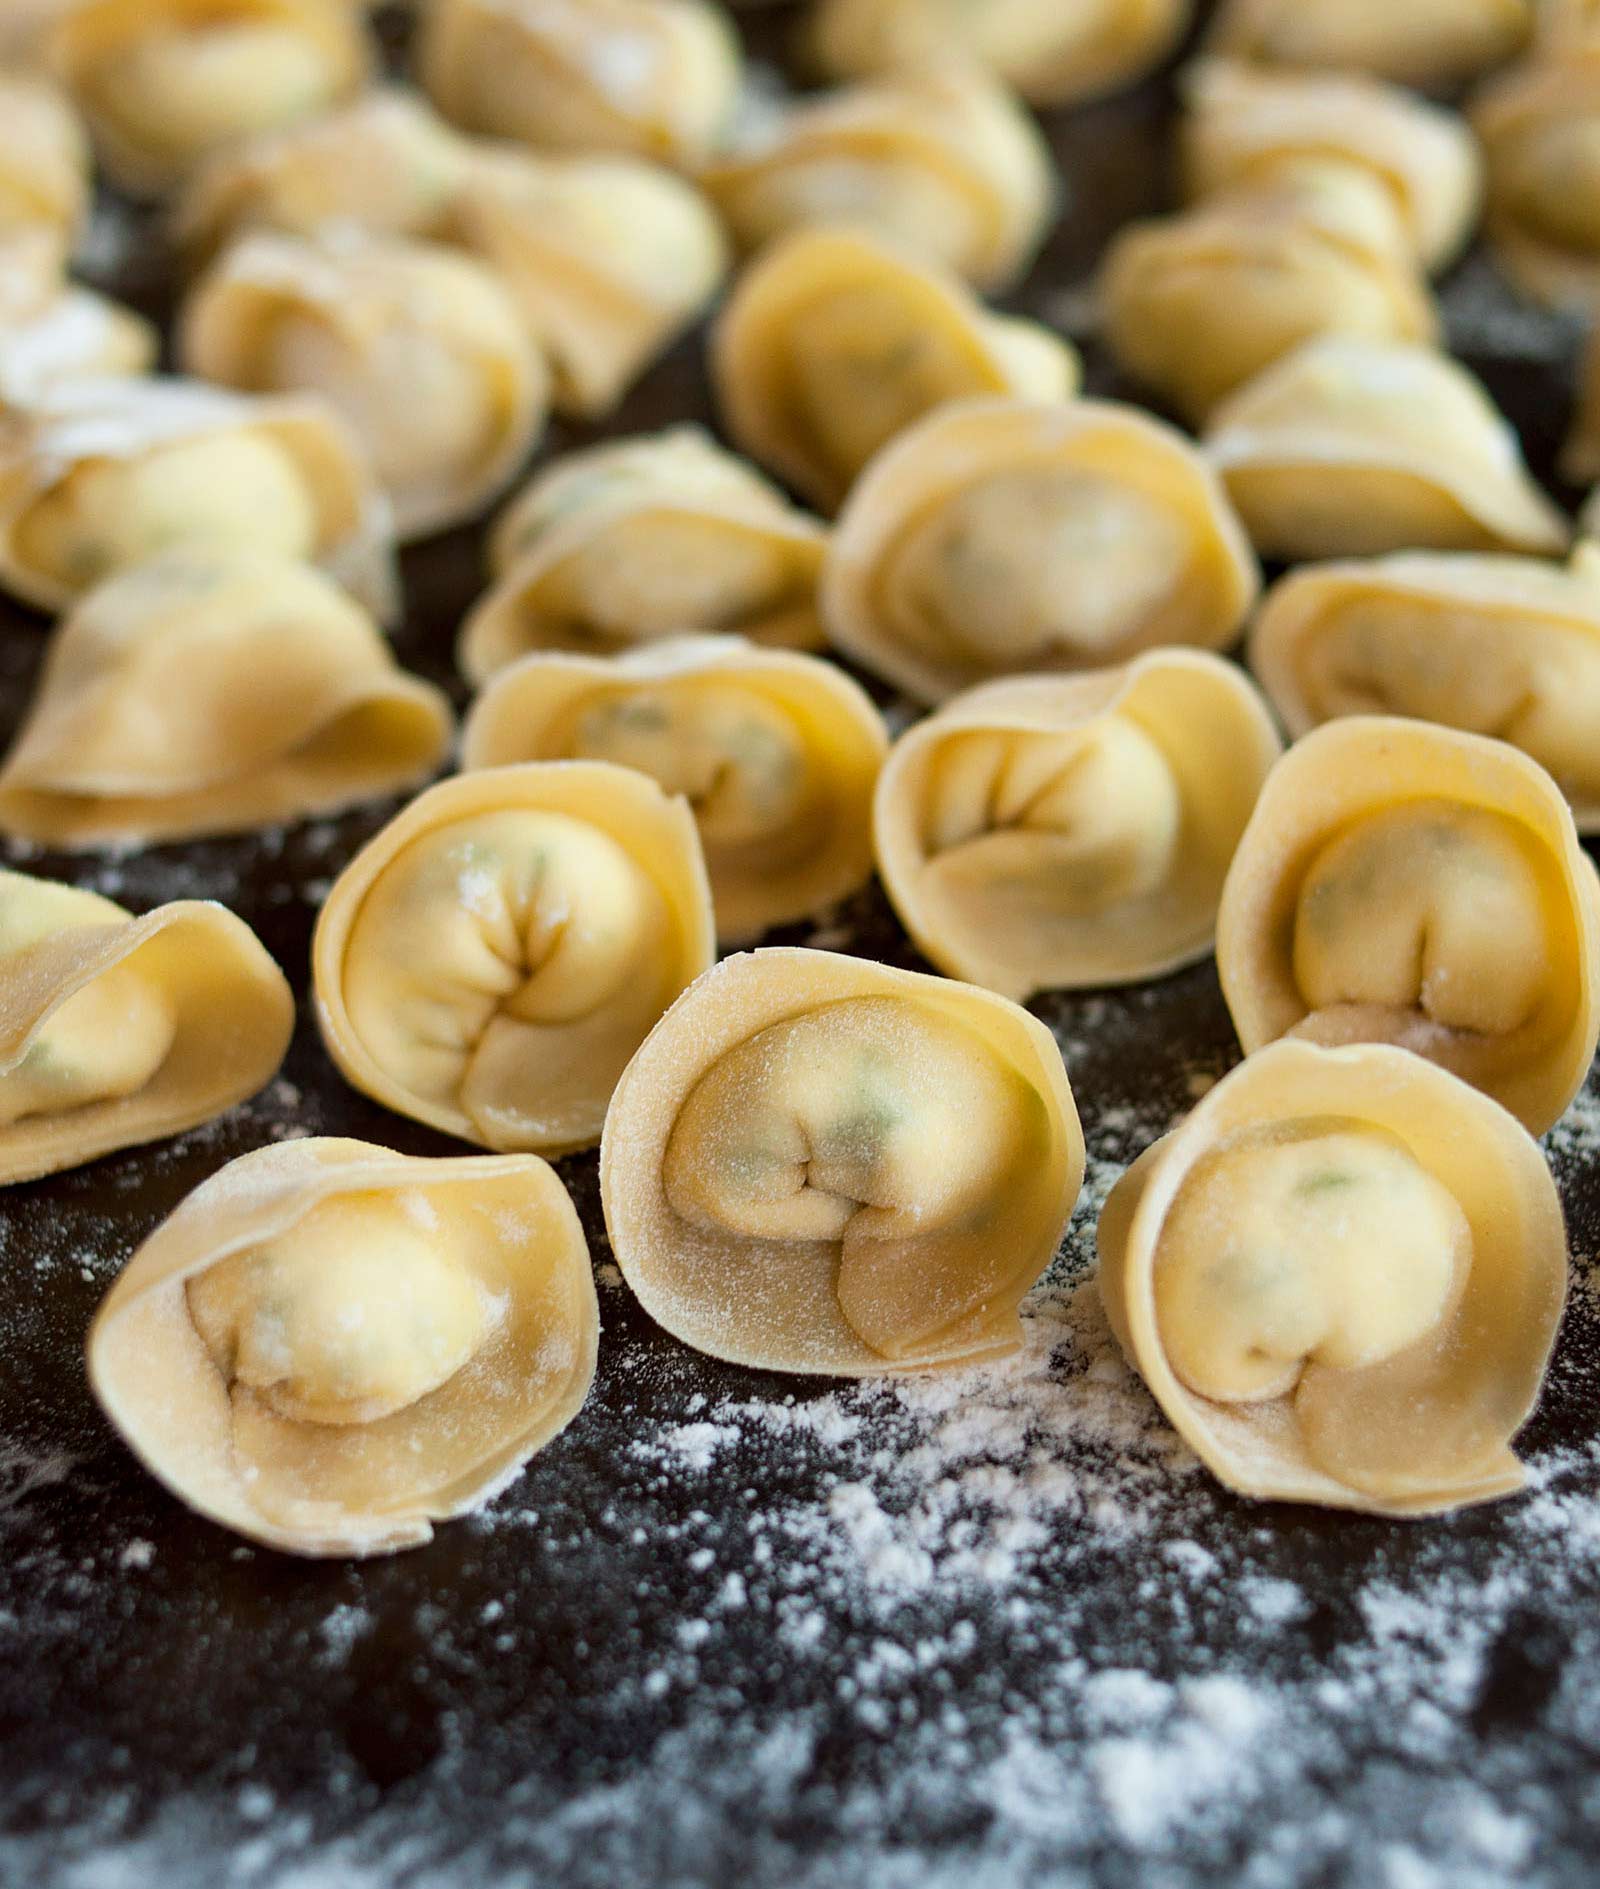 Homemade Tortellini Recipe (Step-by-Step Guide with Photos) | Kitchn